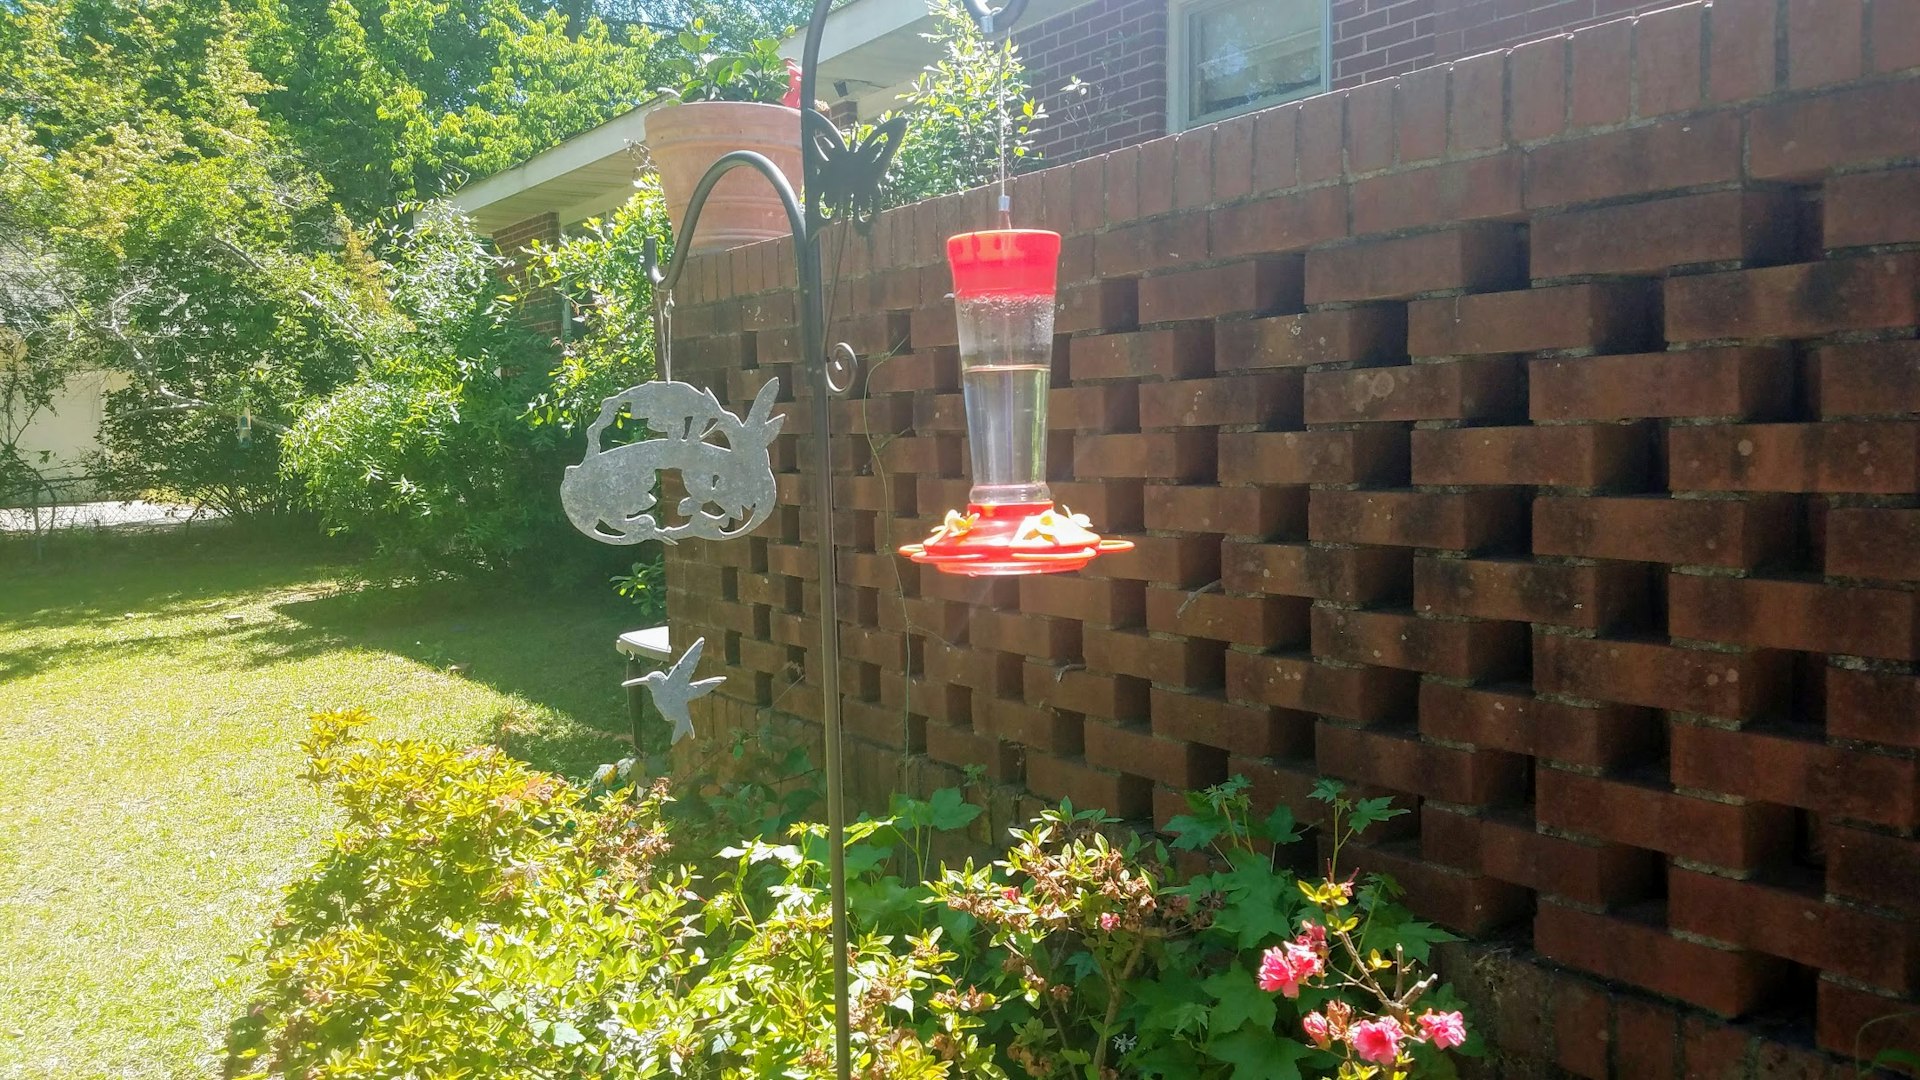 A humming bird feed hangs from a metal stand near an ornamental brick wall in Milledgeville, Georgia